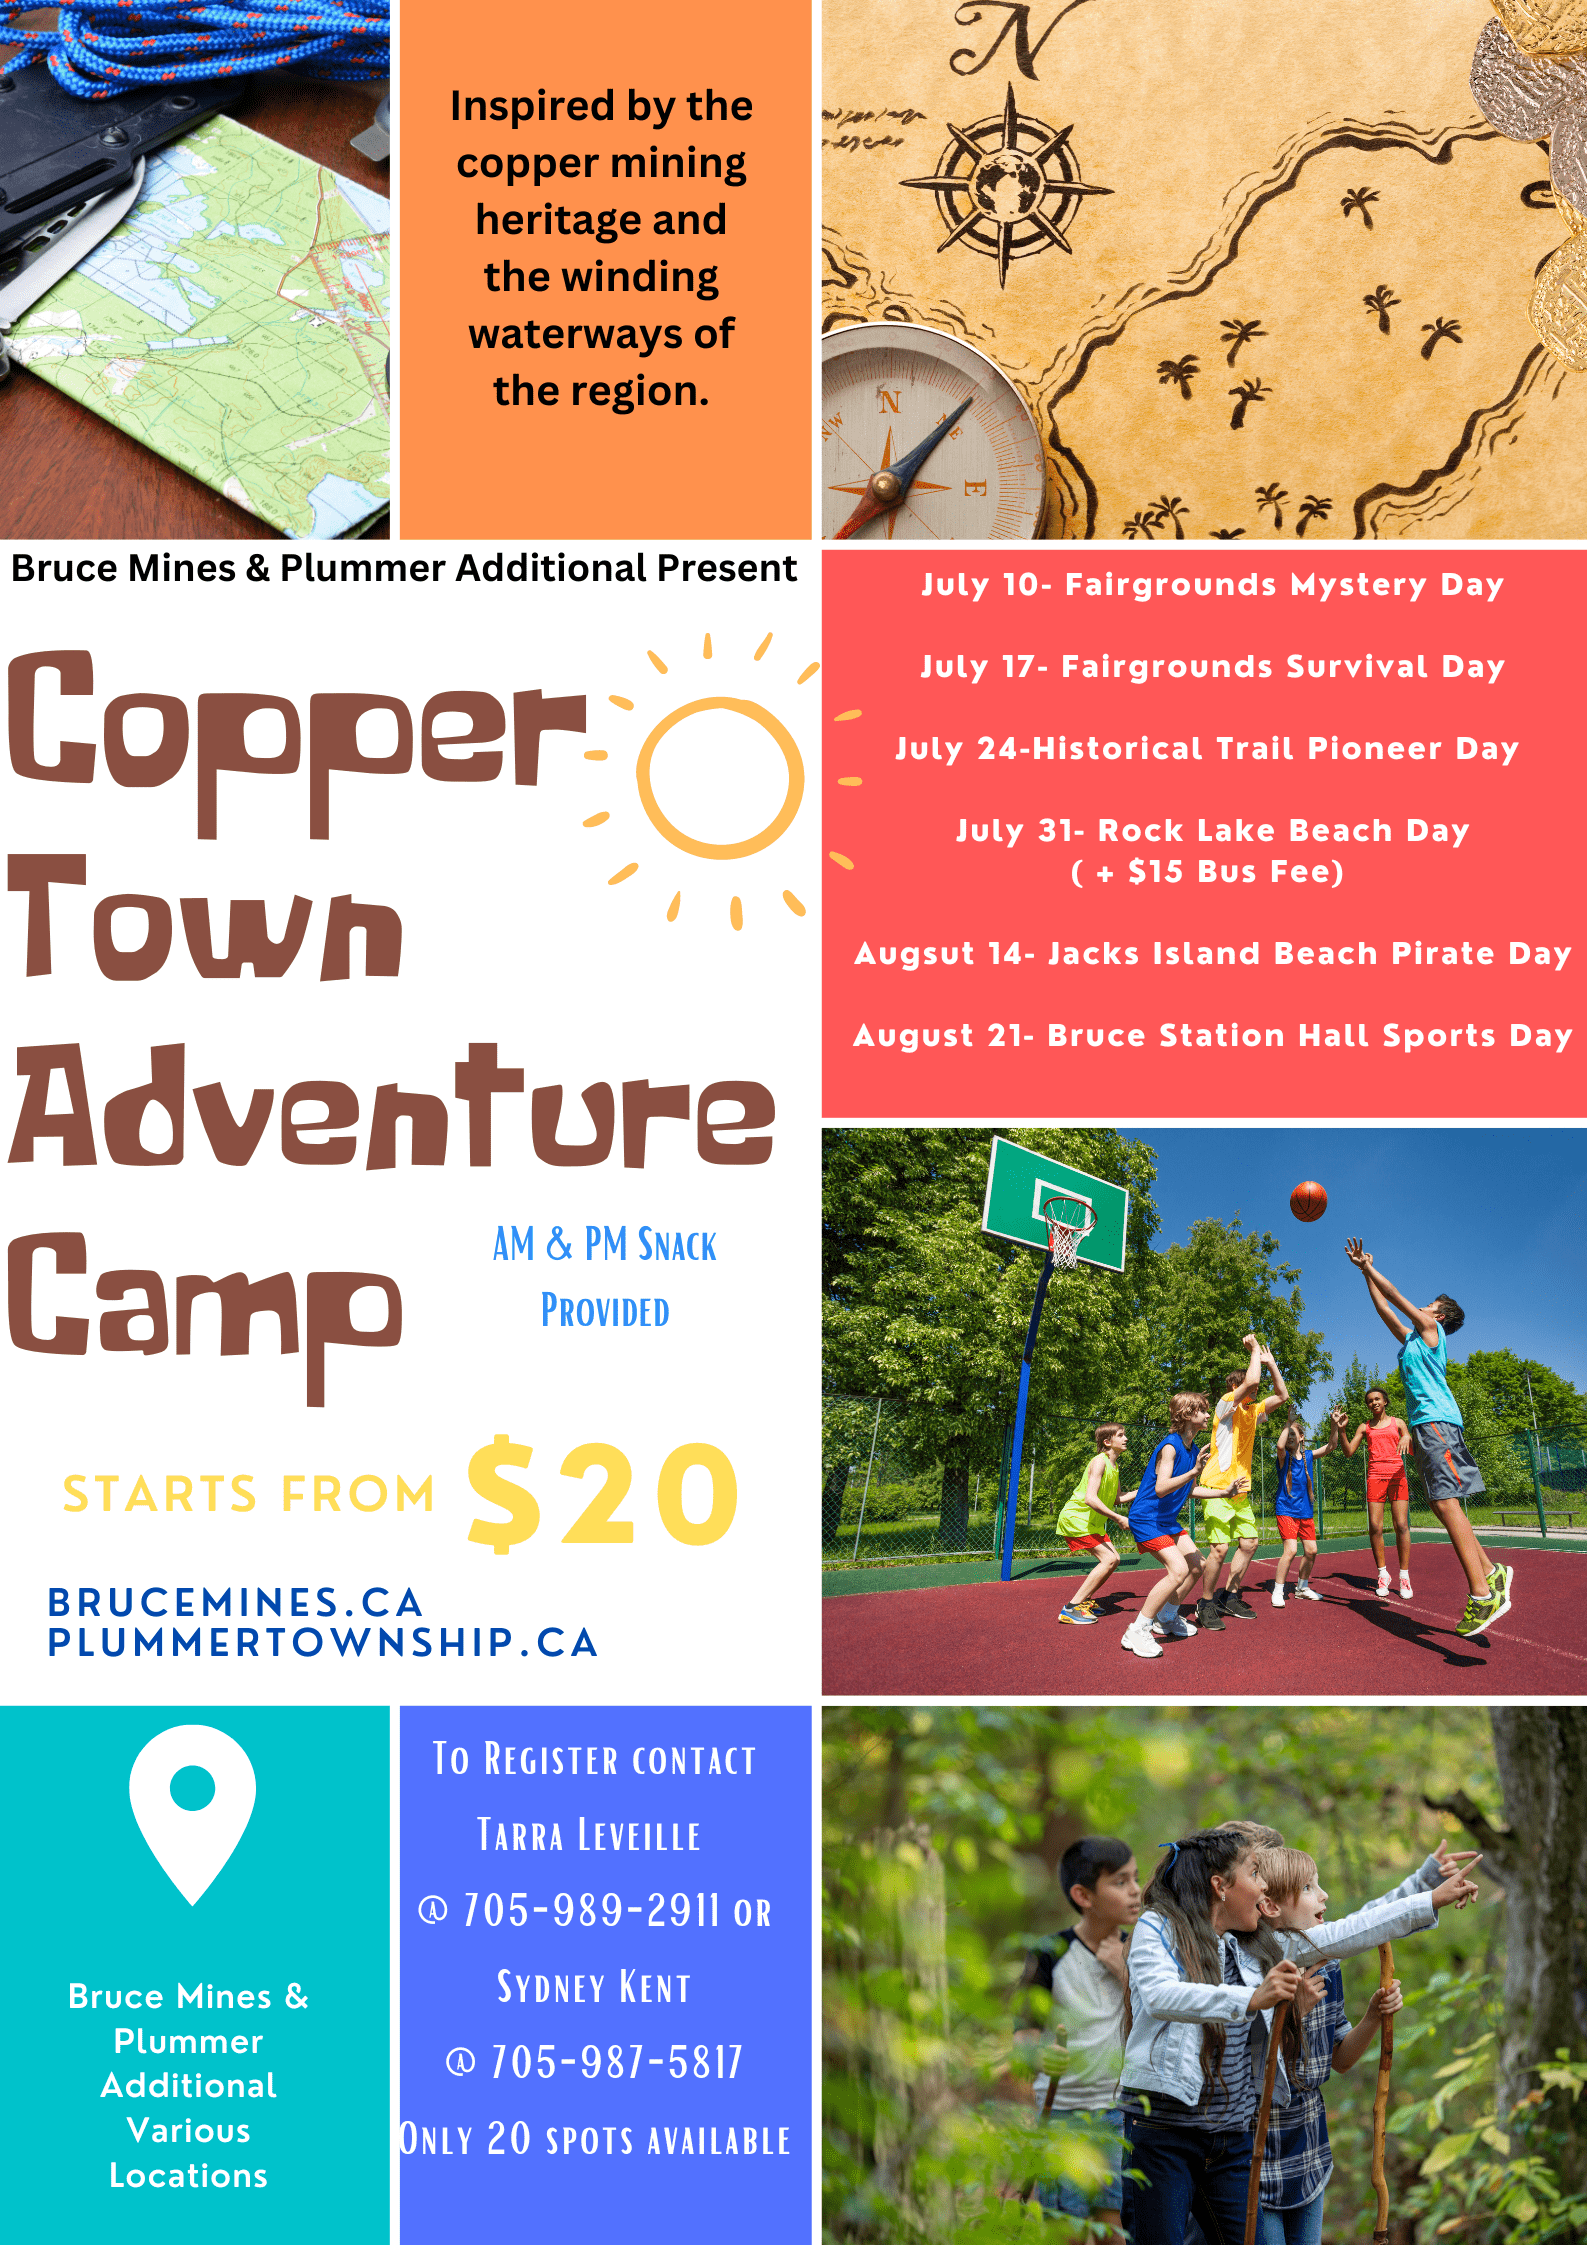 Copper Town Adventure Camp - July 10